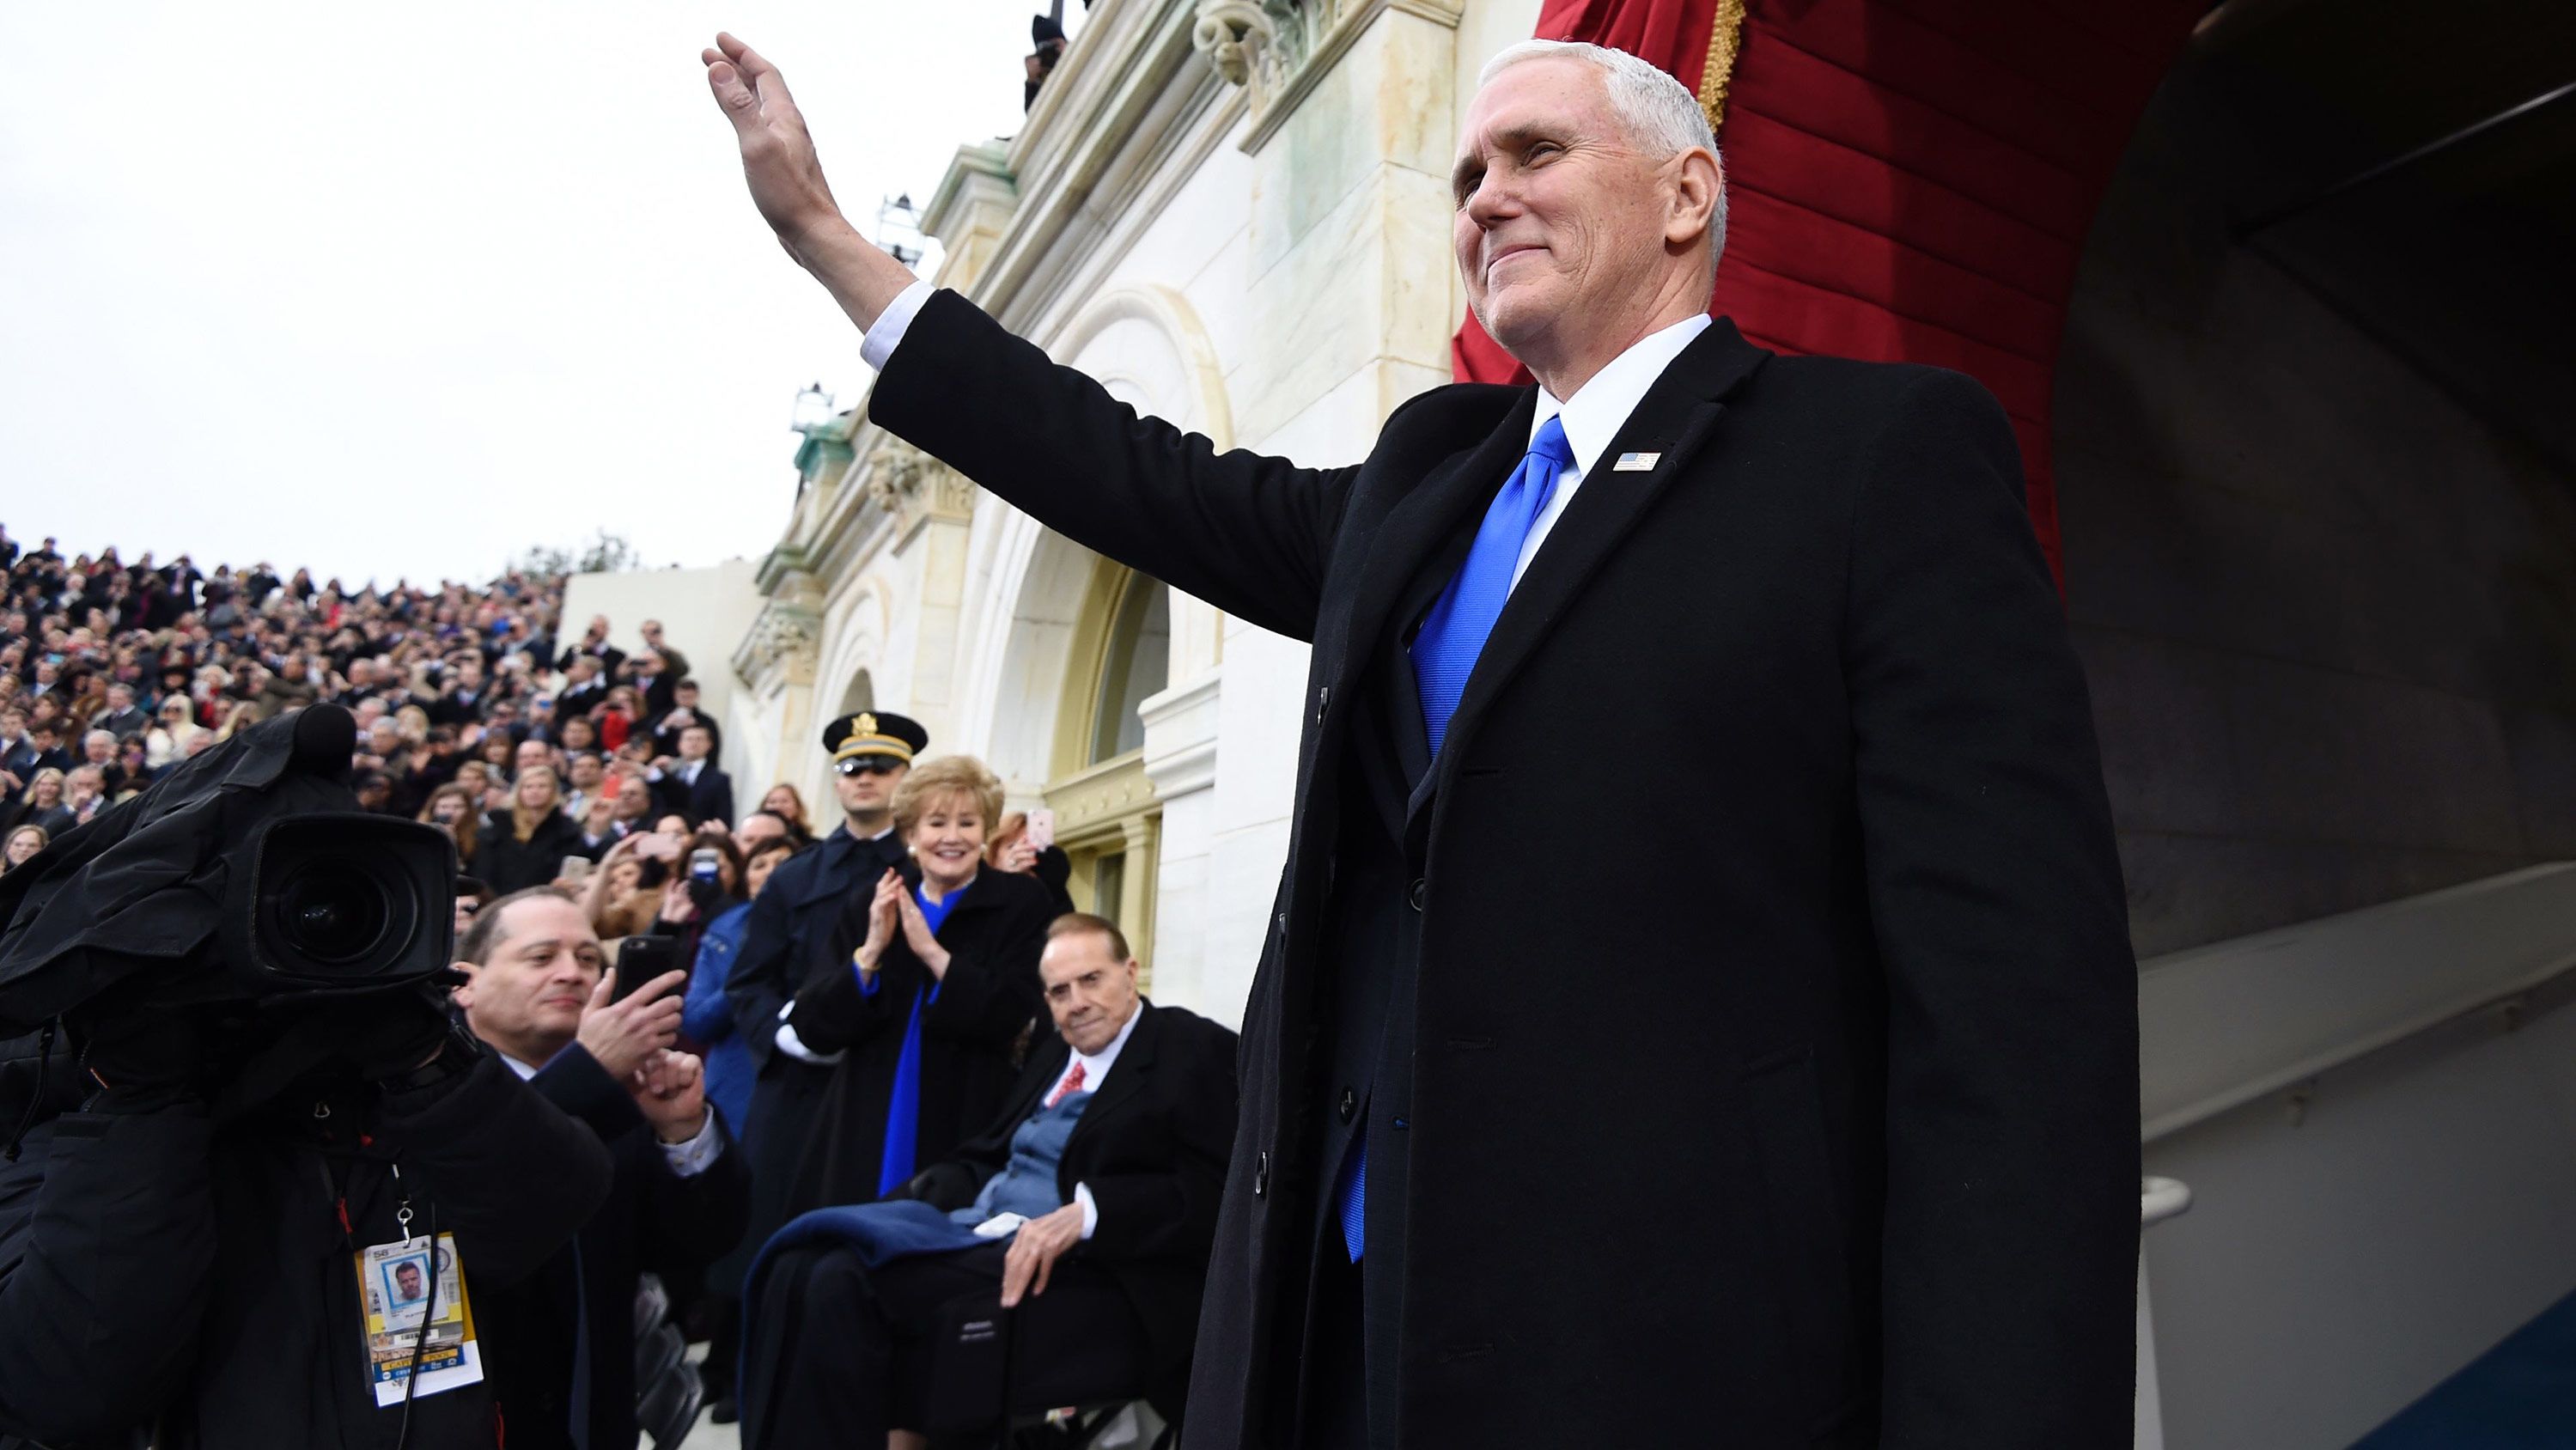 Pence arrives for Trump's inauguration in January 2017.